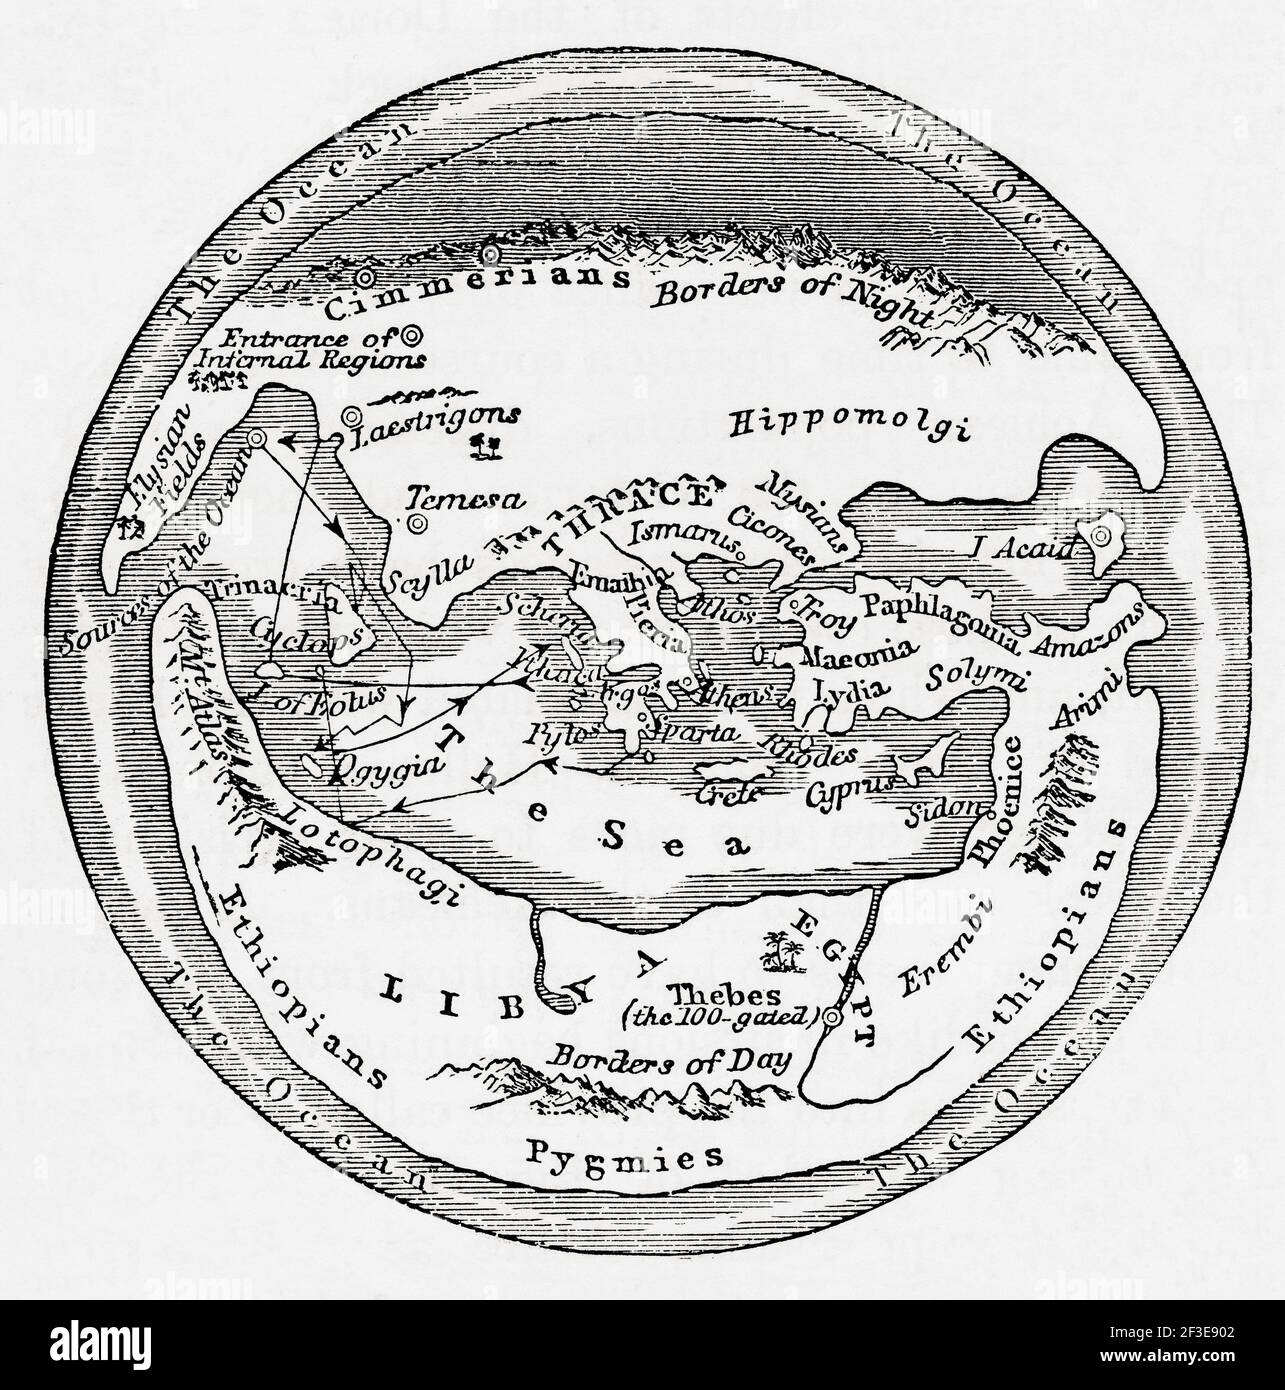 Map Of The World According To Homer From Cassells Universal History Published 1888 2F3E902 